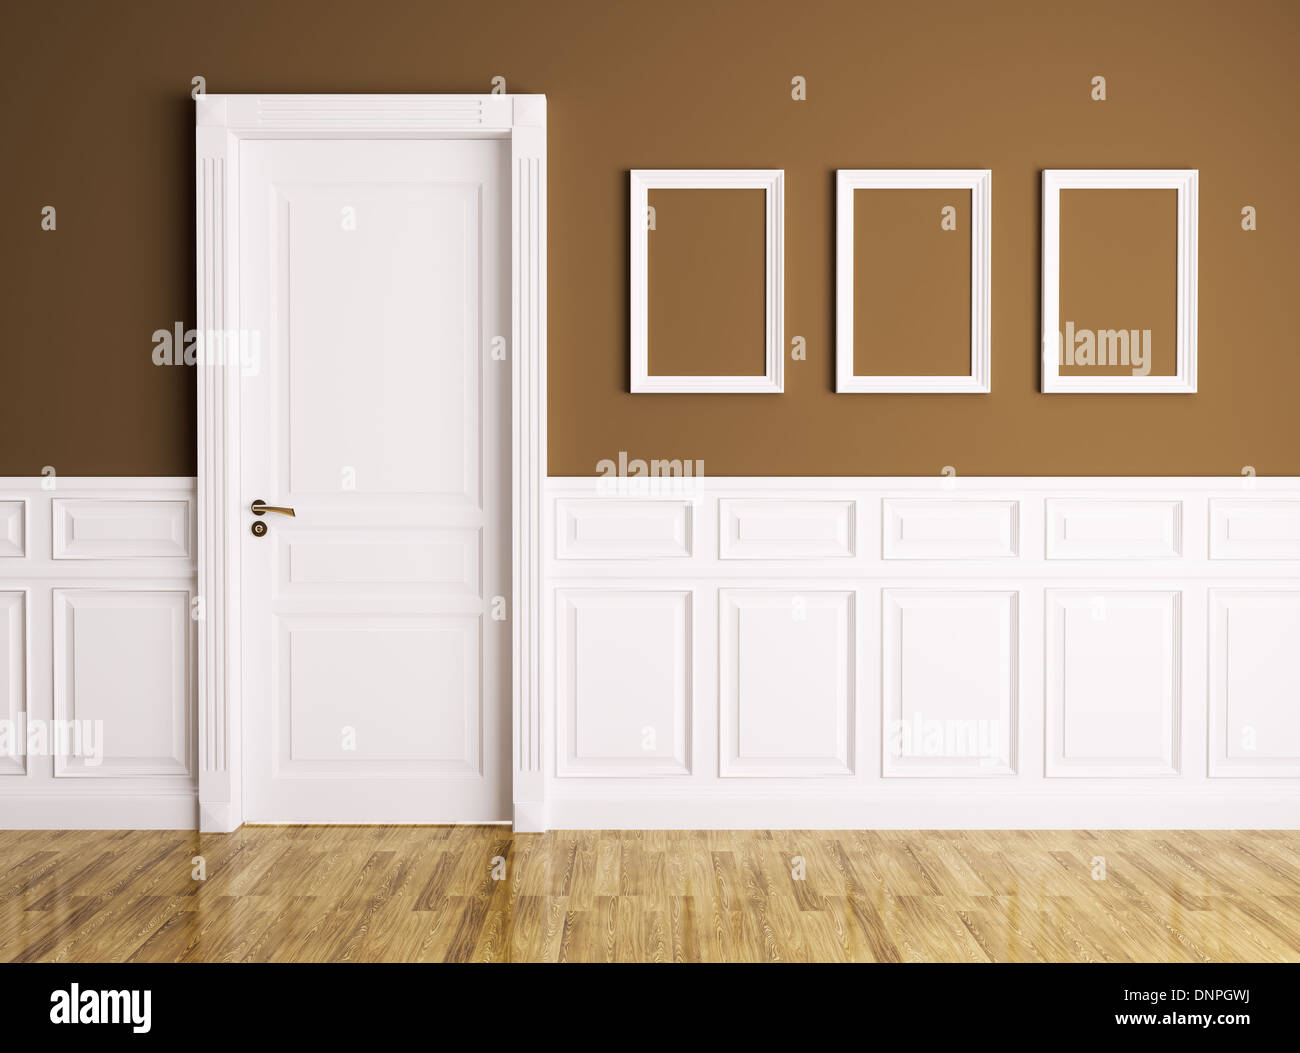 Interior of a room with classic door and frames Stock Photo